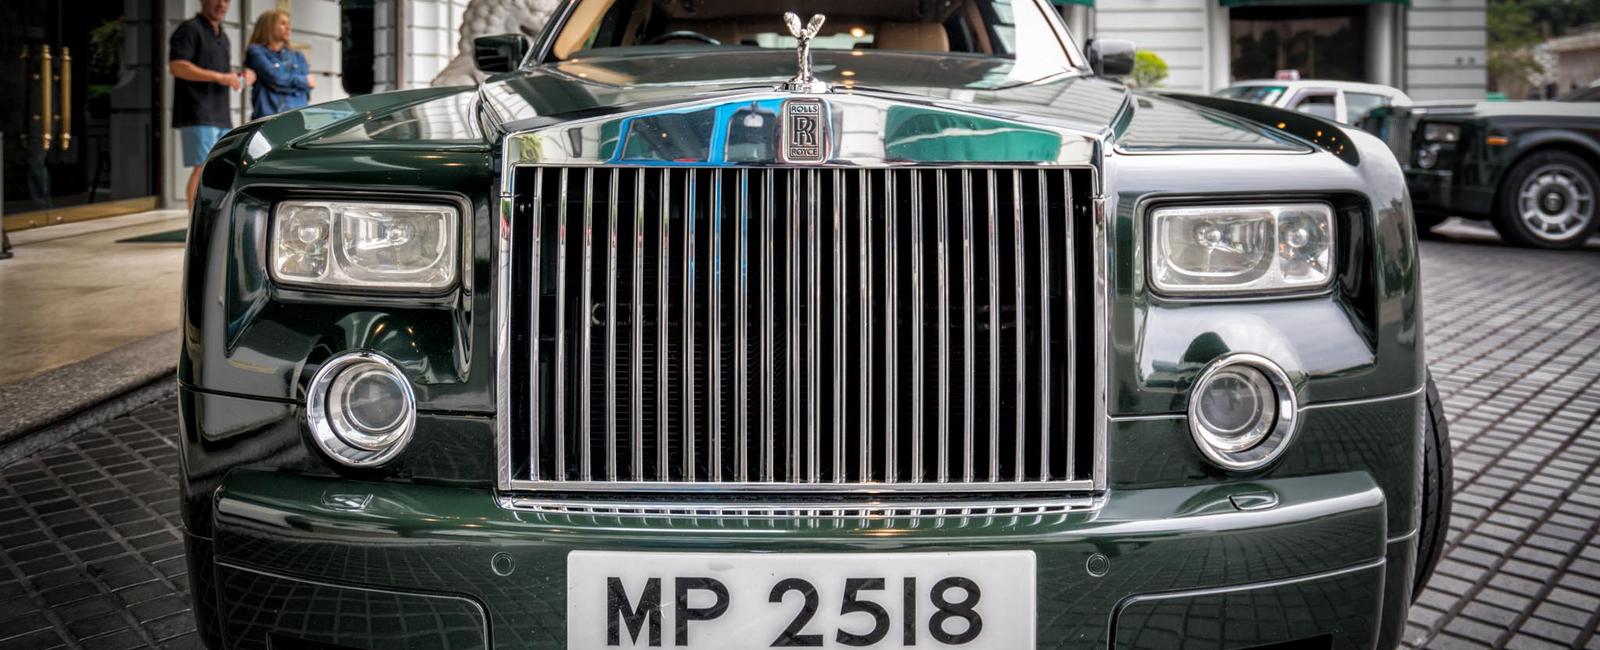 The city with the most rolls royce per capita is hong kong